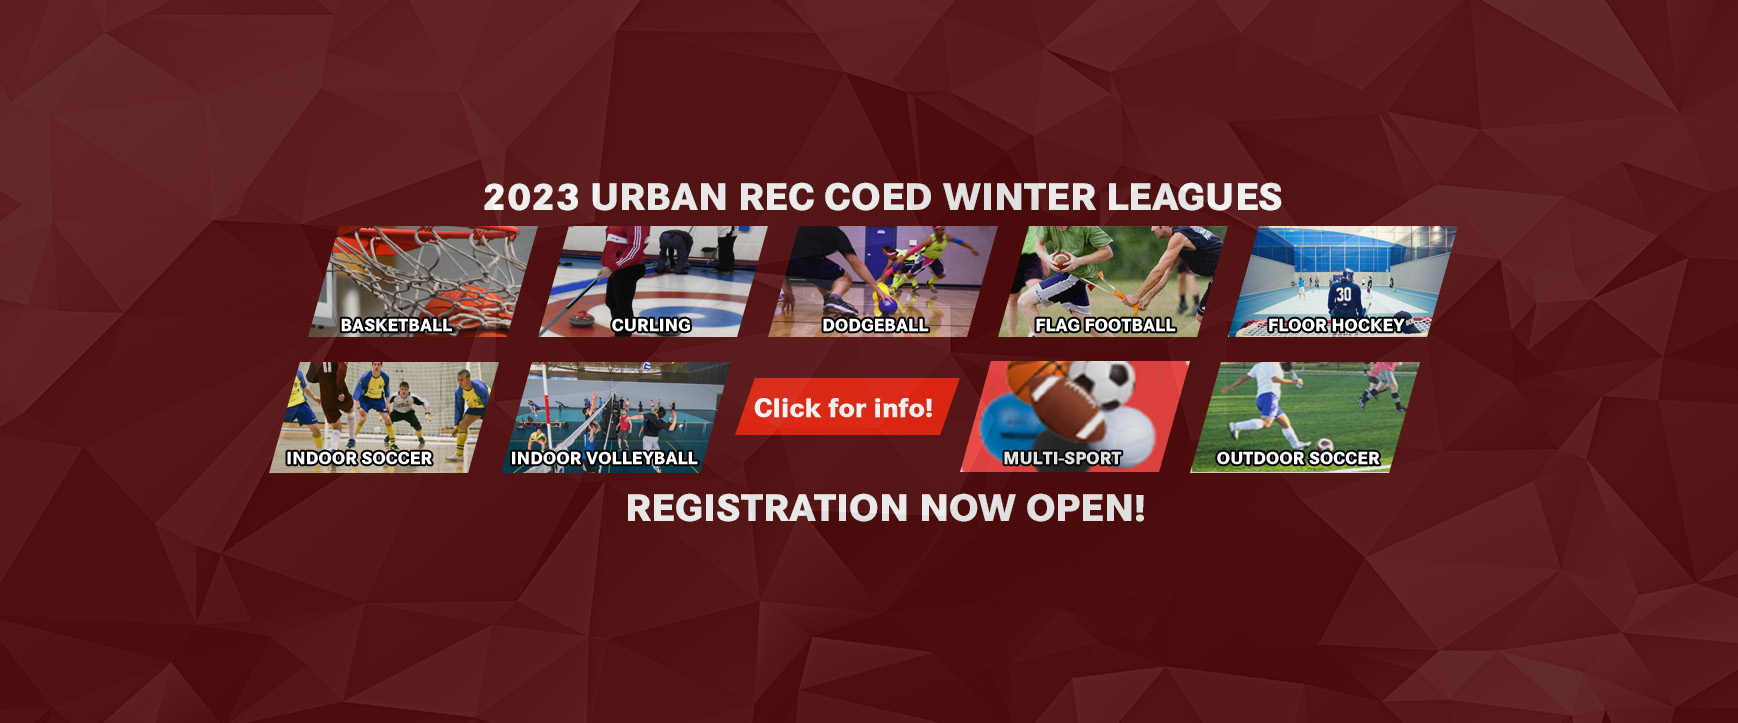 Get into the action with Urban Rec